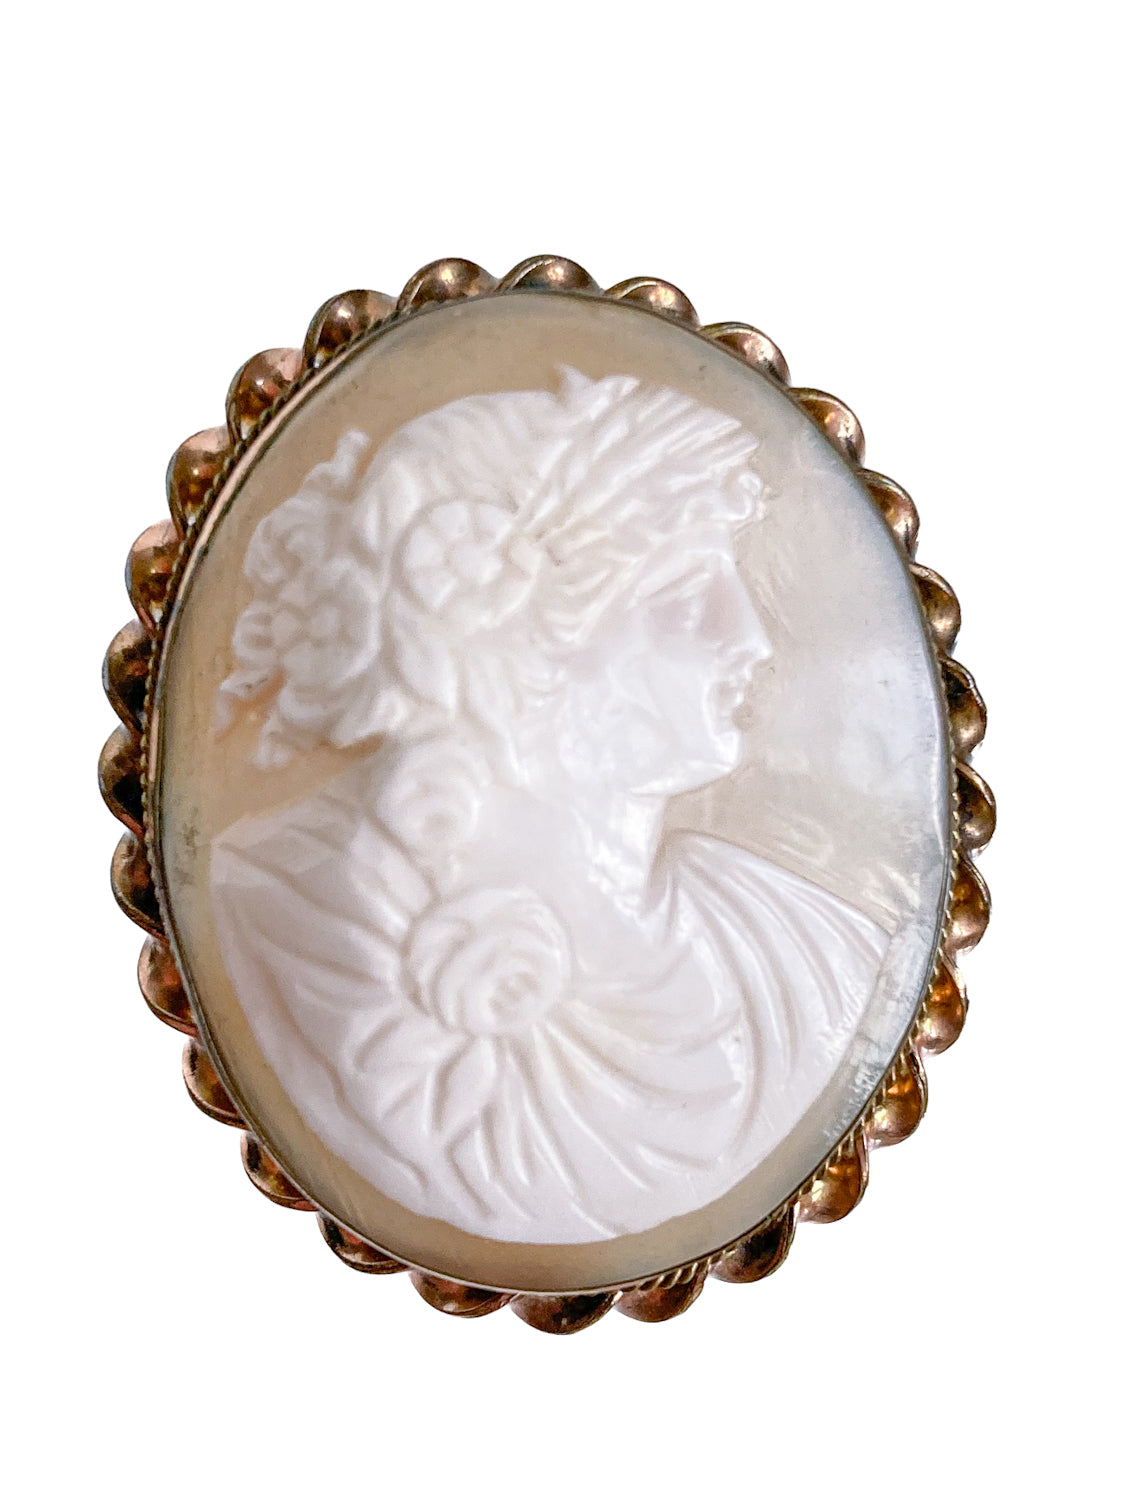 Vintage Twist Oval Gold Toned Italian Shell Carved Cameo Brooch Pin